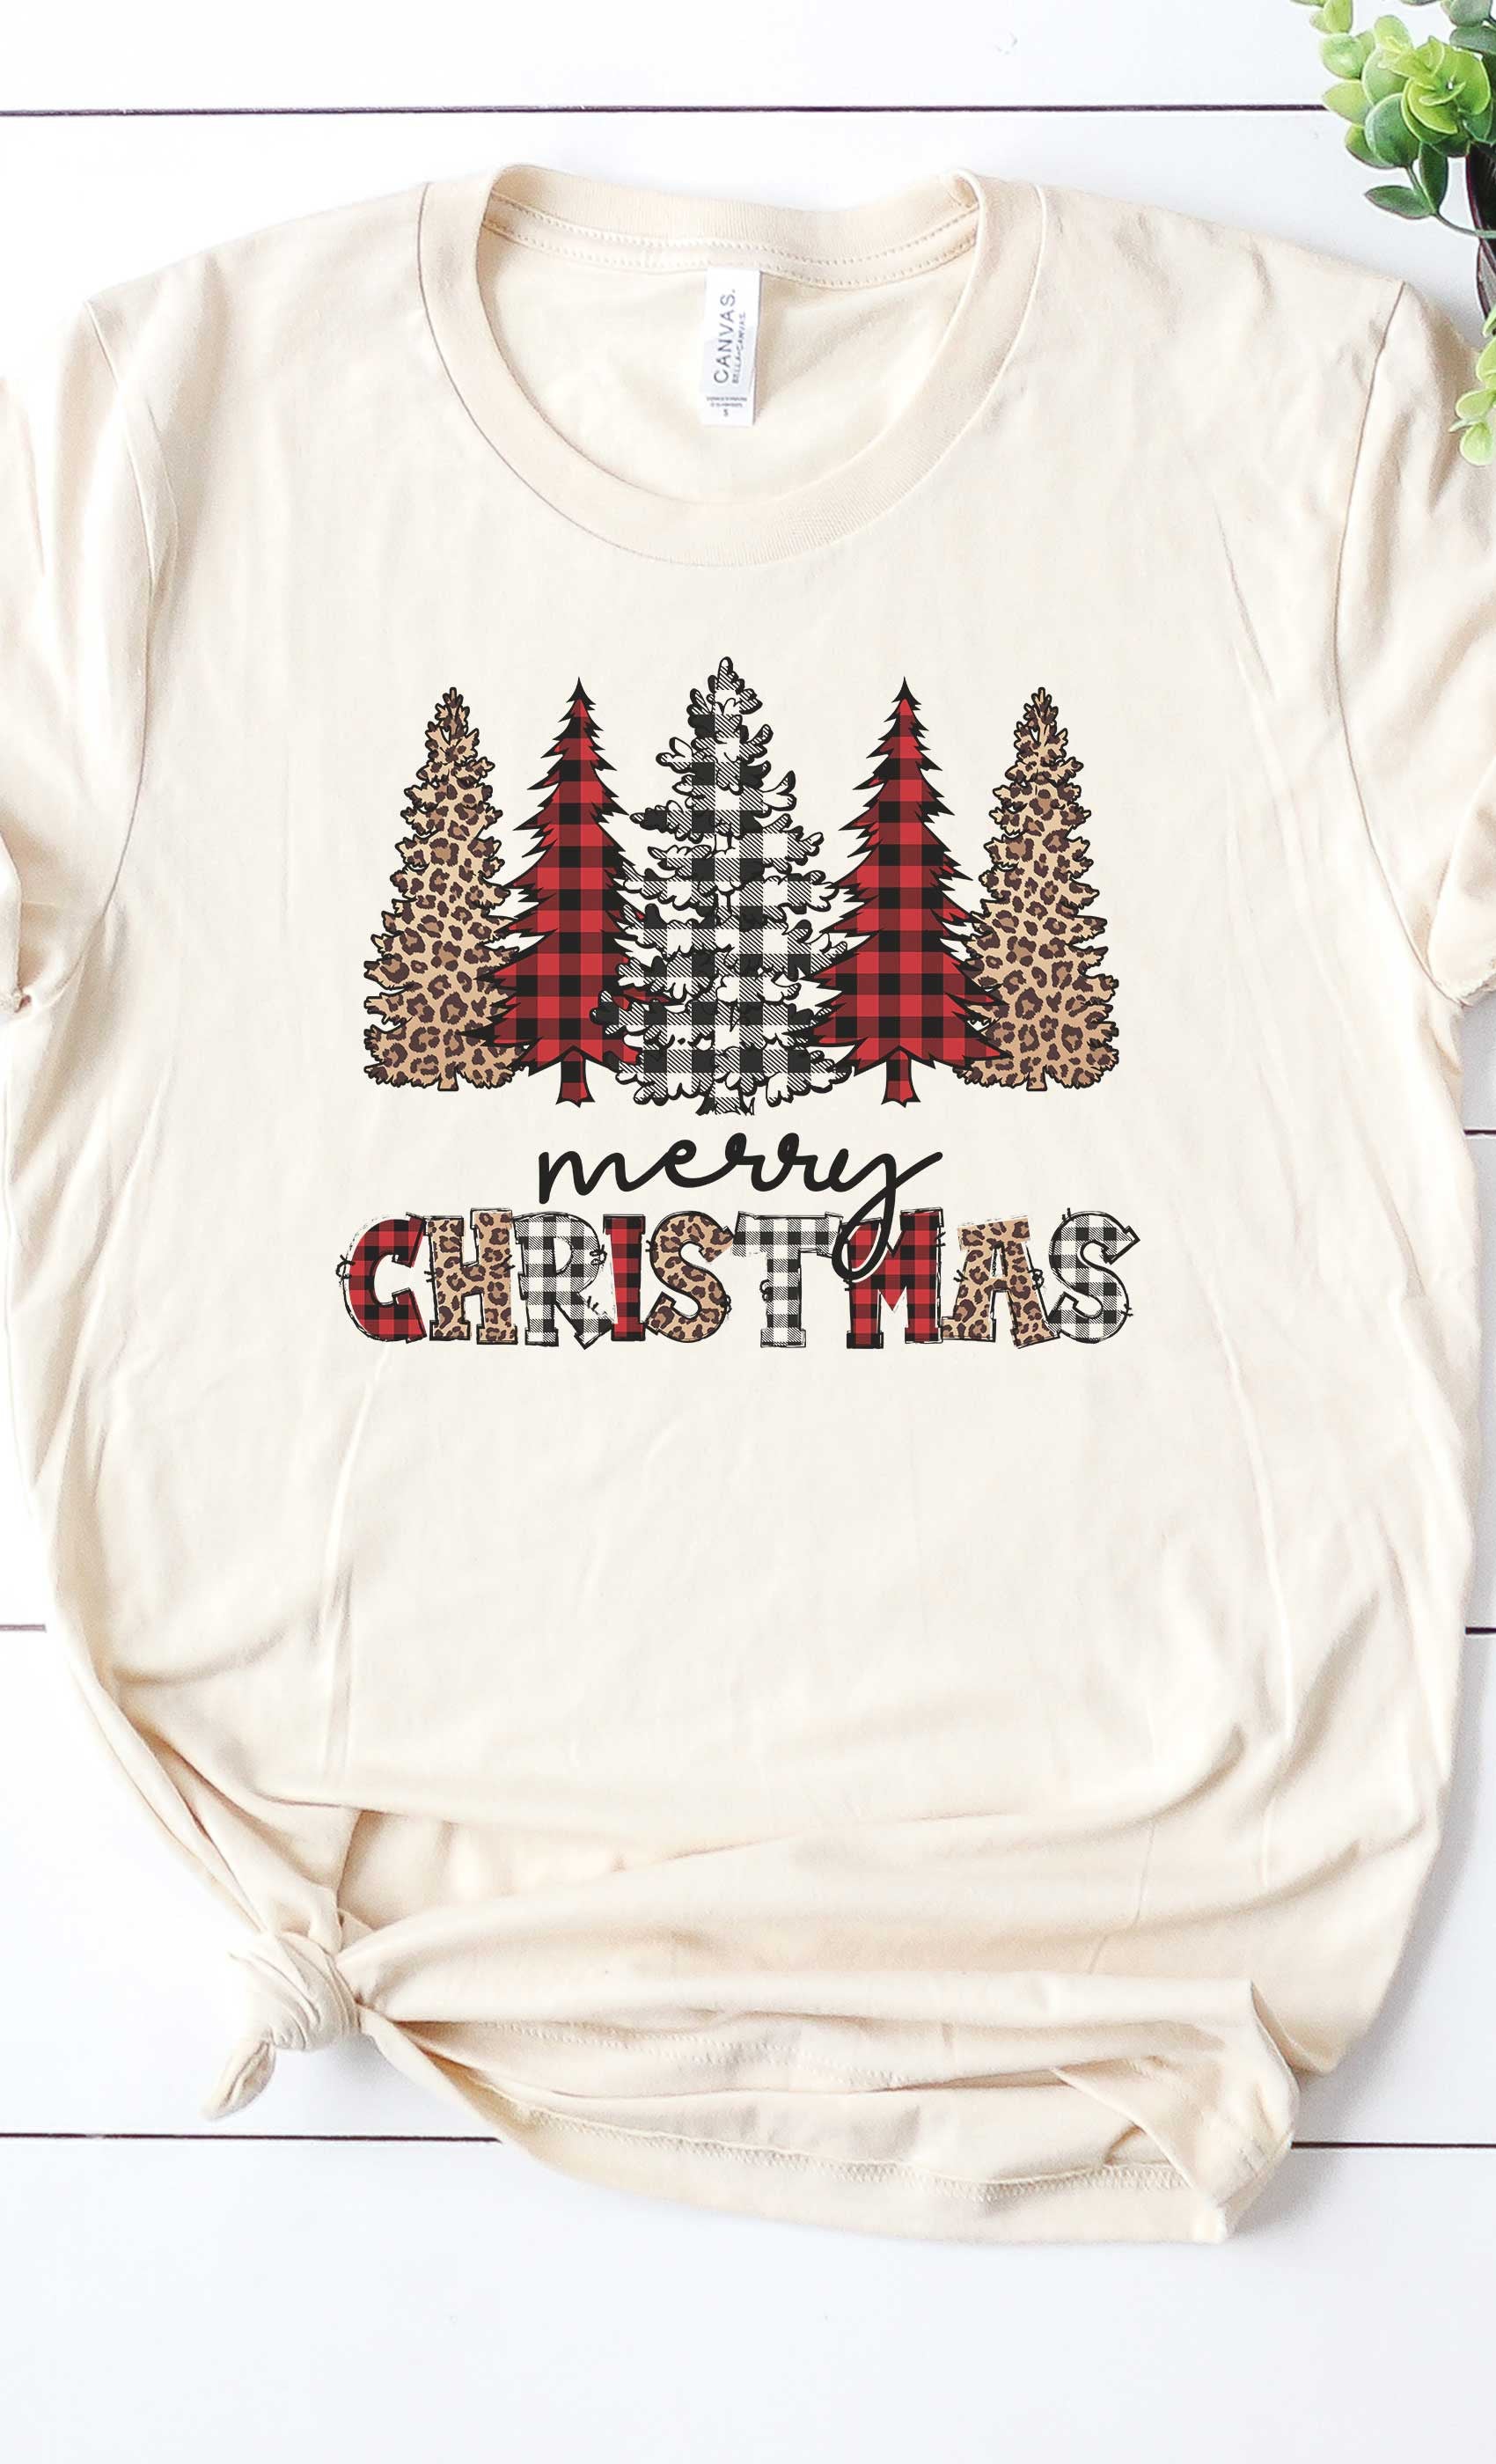 Red Plaid and Leopard Merry Christmas with trees tee